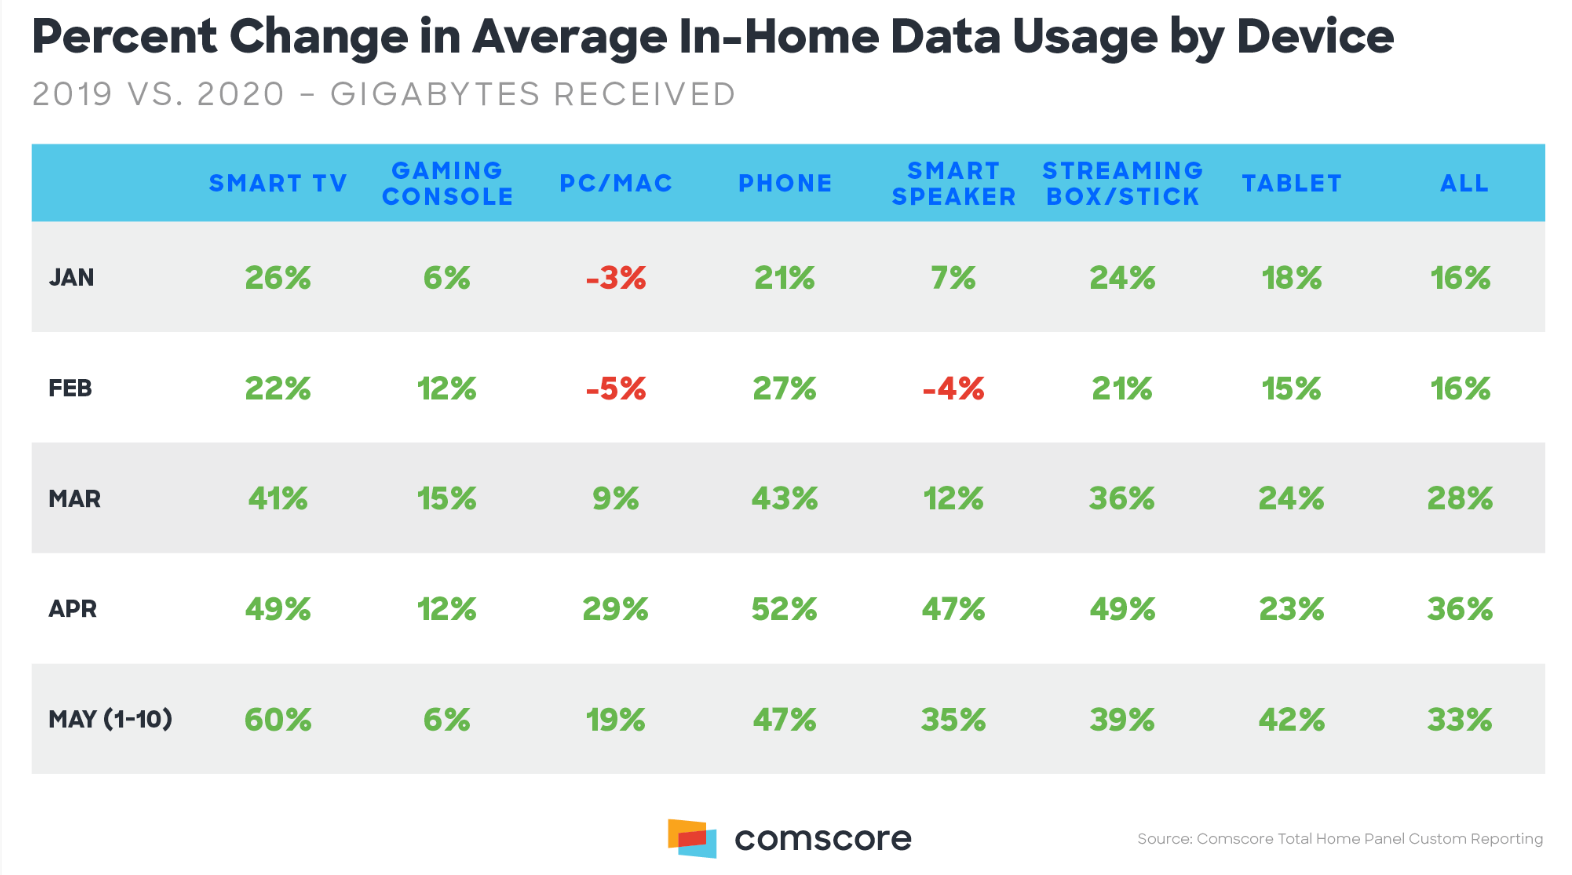 Percent change in average in-home data usage by device